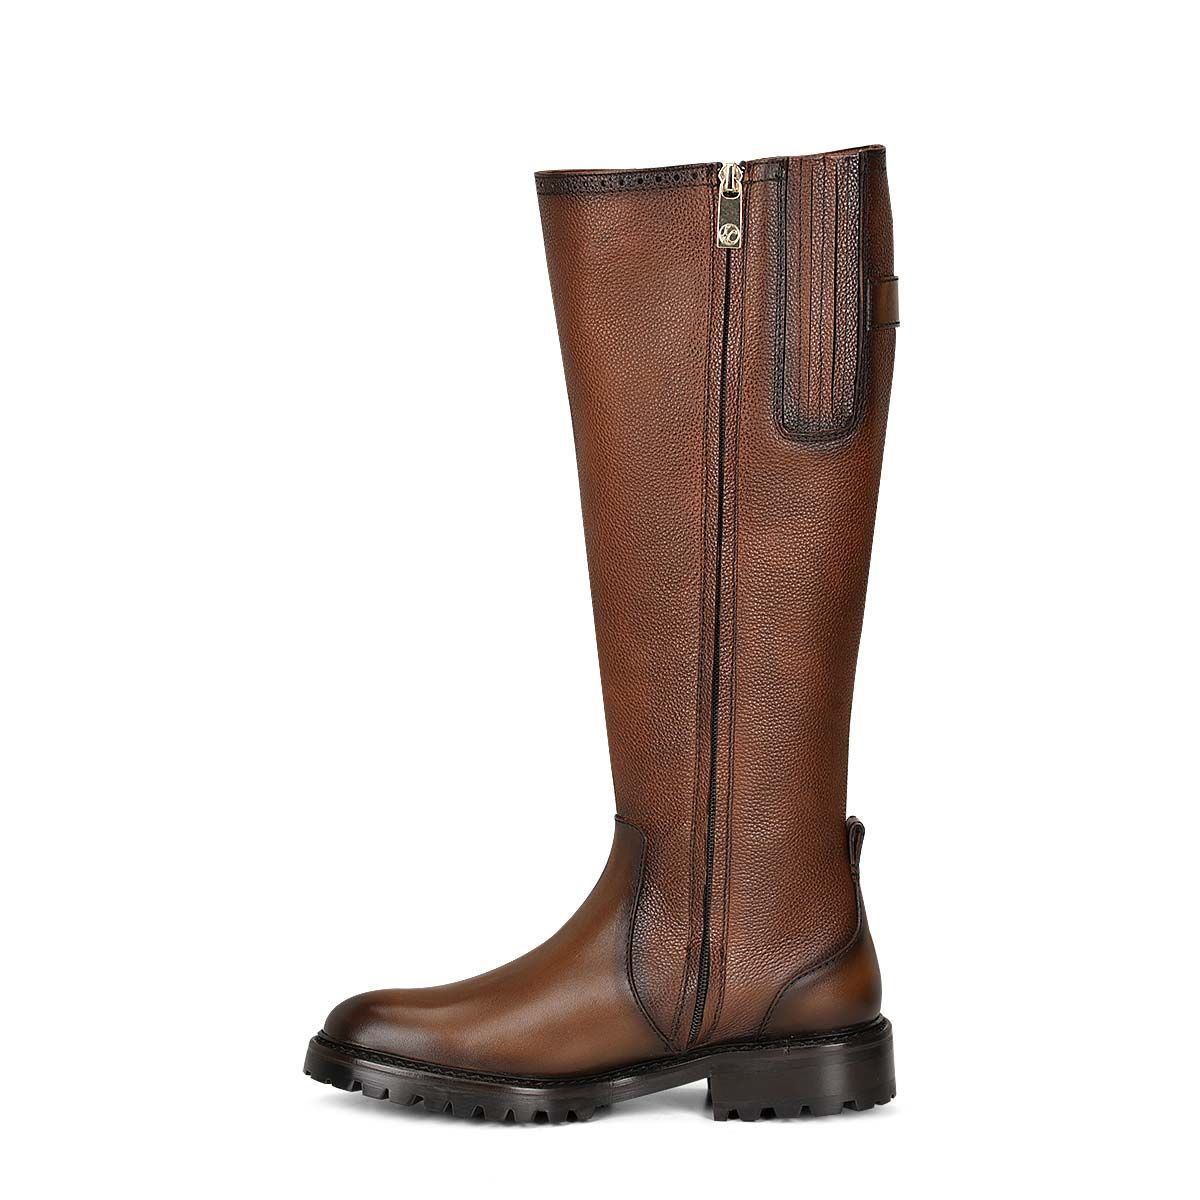 94TTSRS - Franco Cuadra brown casual leather riding boots for women.-Kuet.us